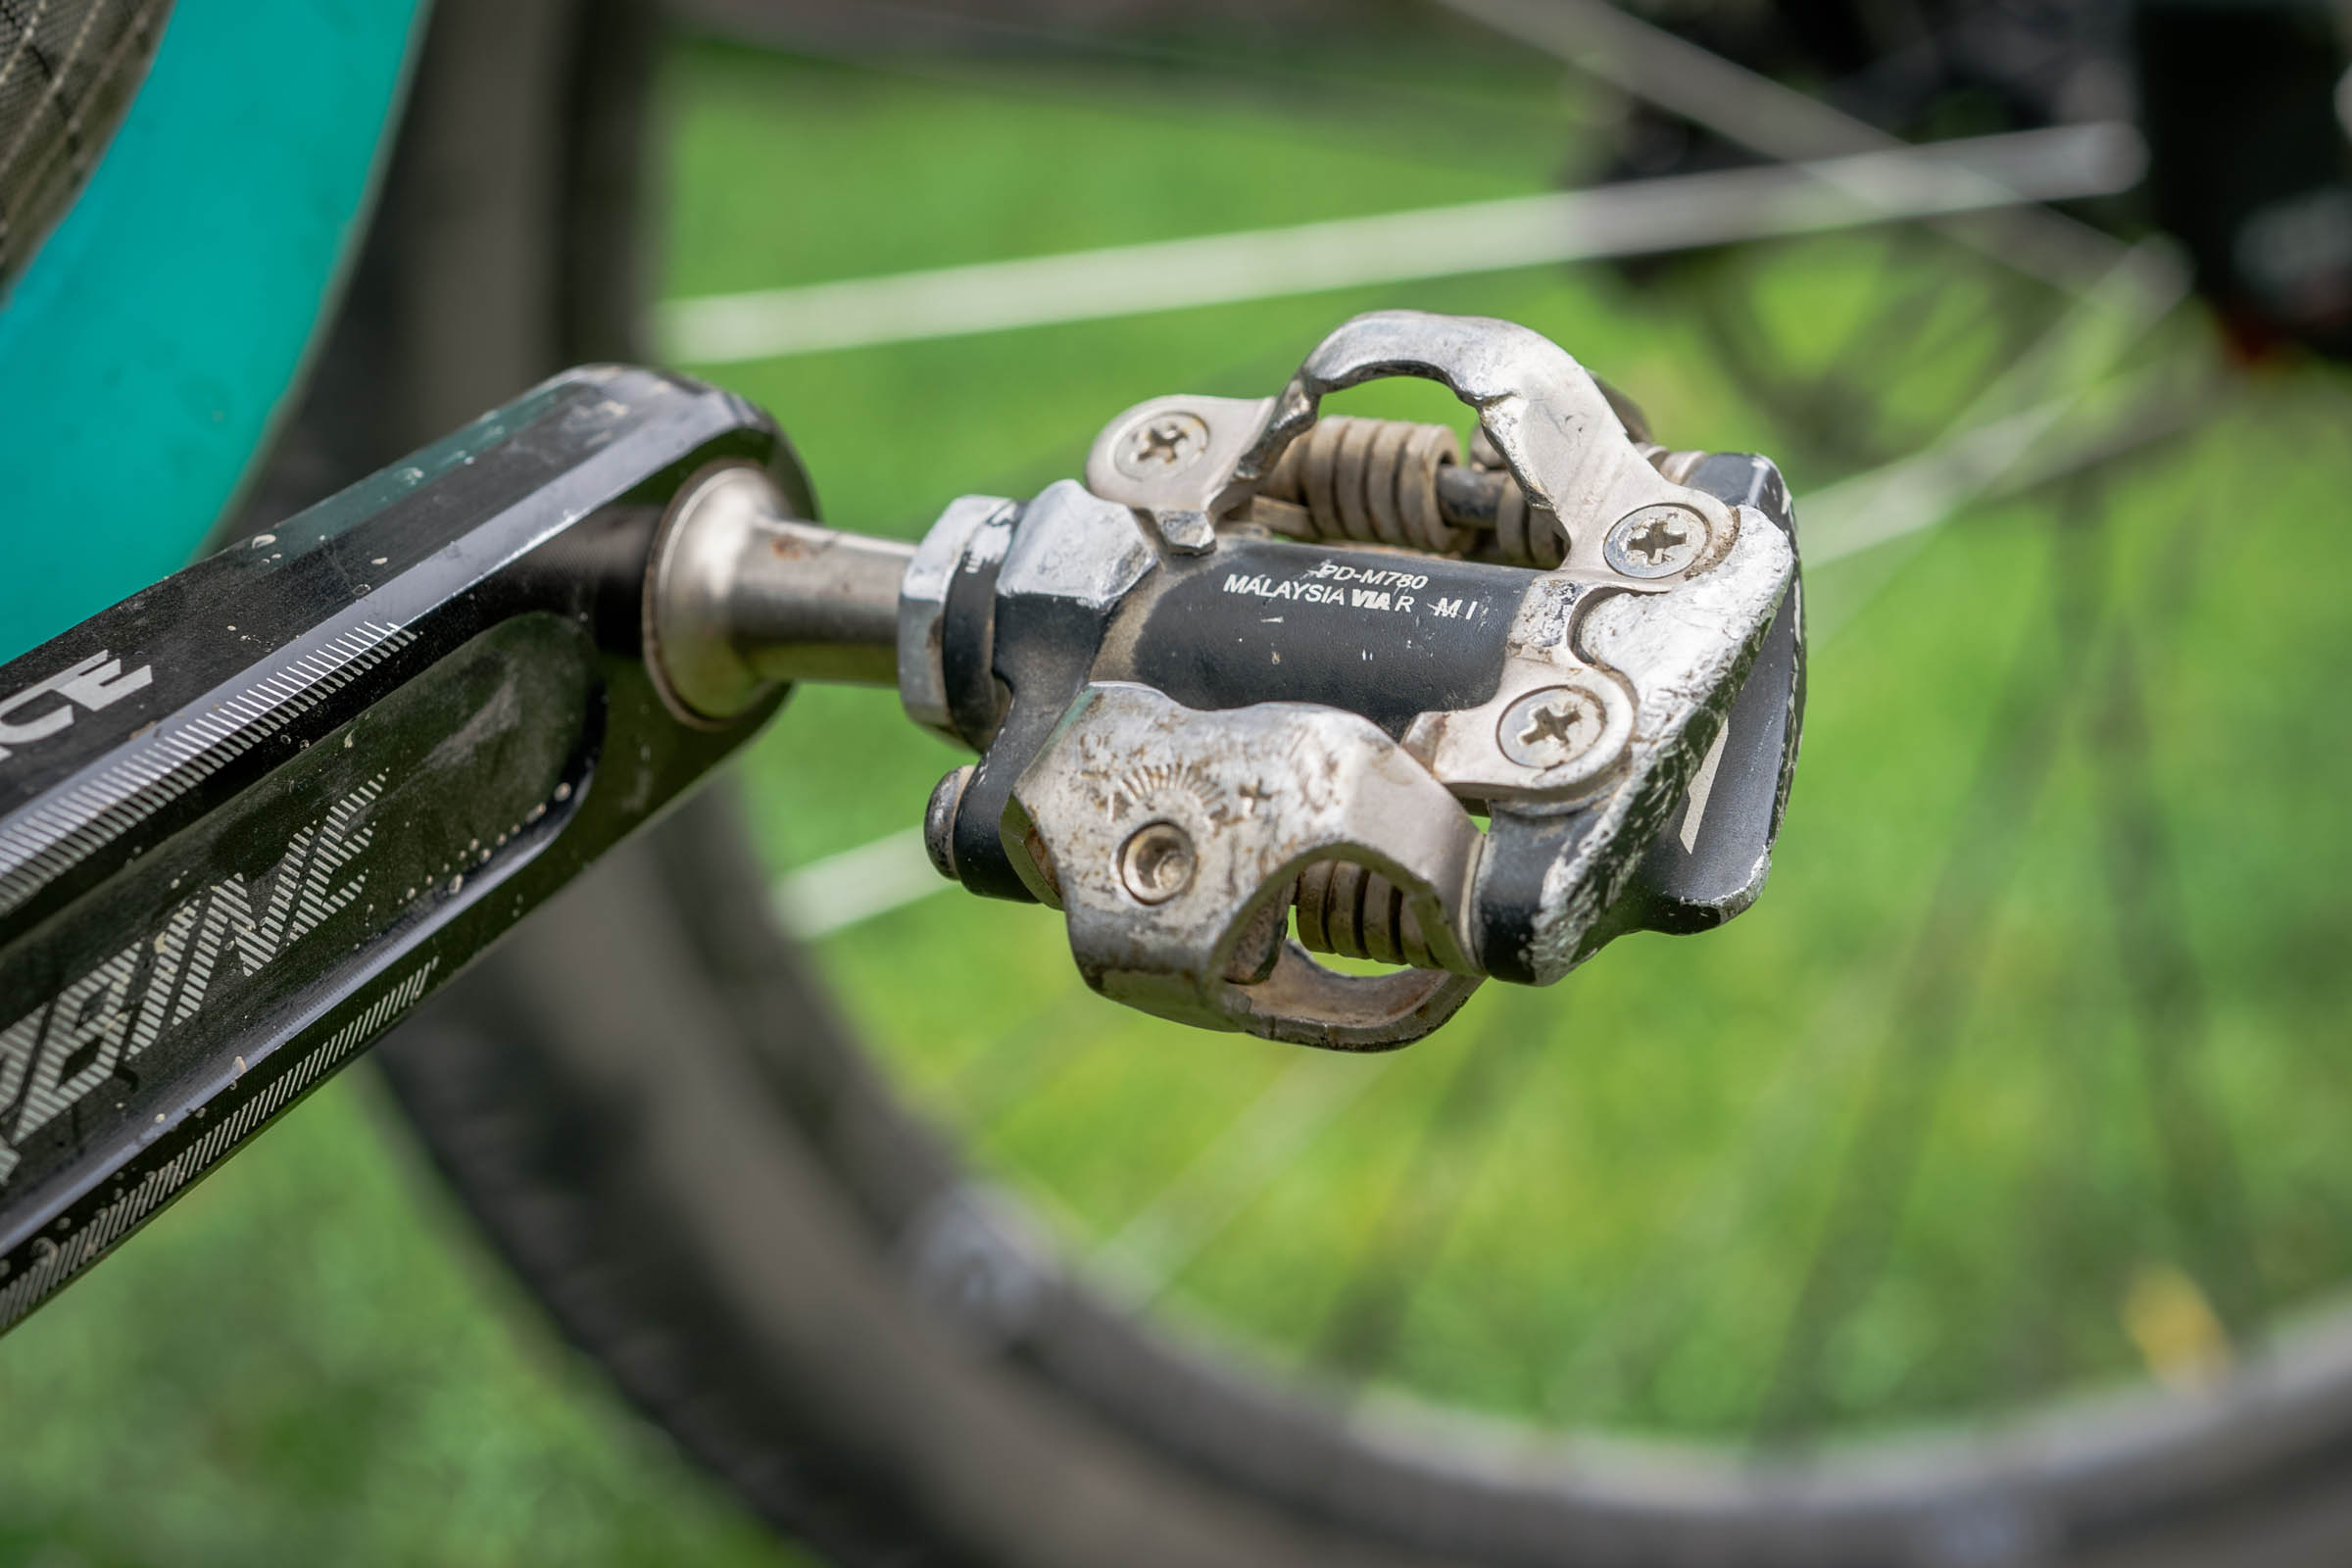 shimano mtb clipless pedals